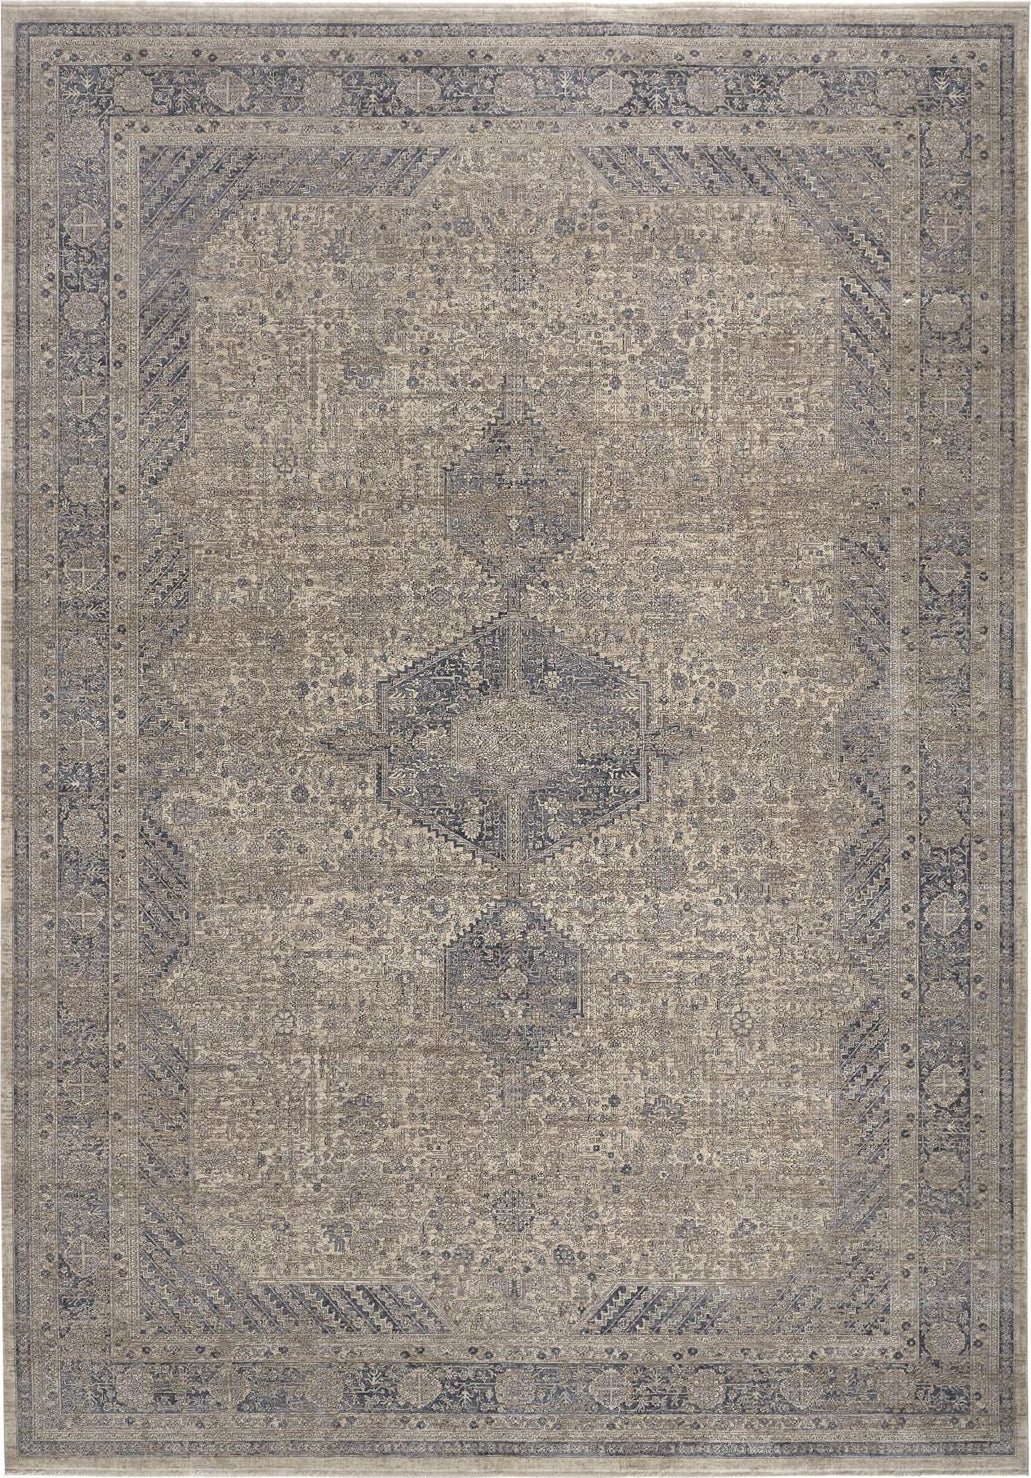 Feizy Marquette 3775F Gray/Blue Area Rug main image